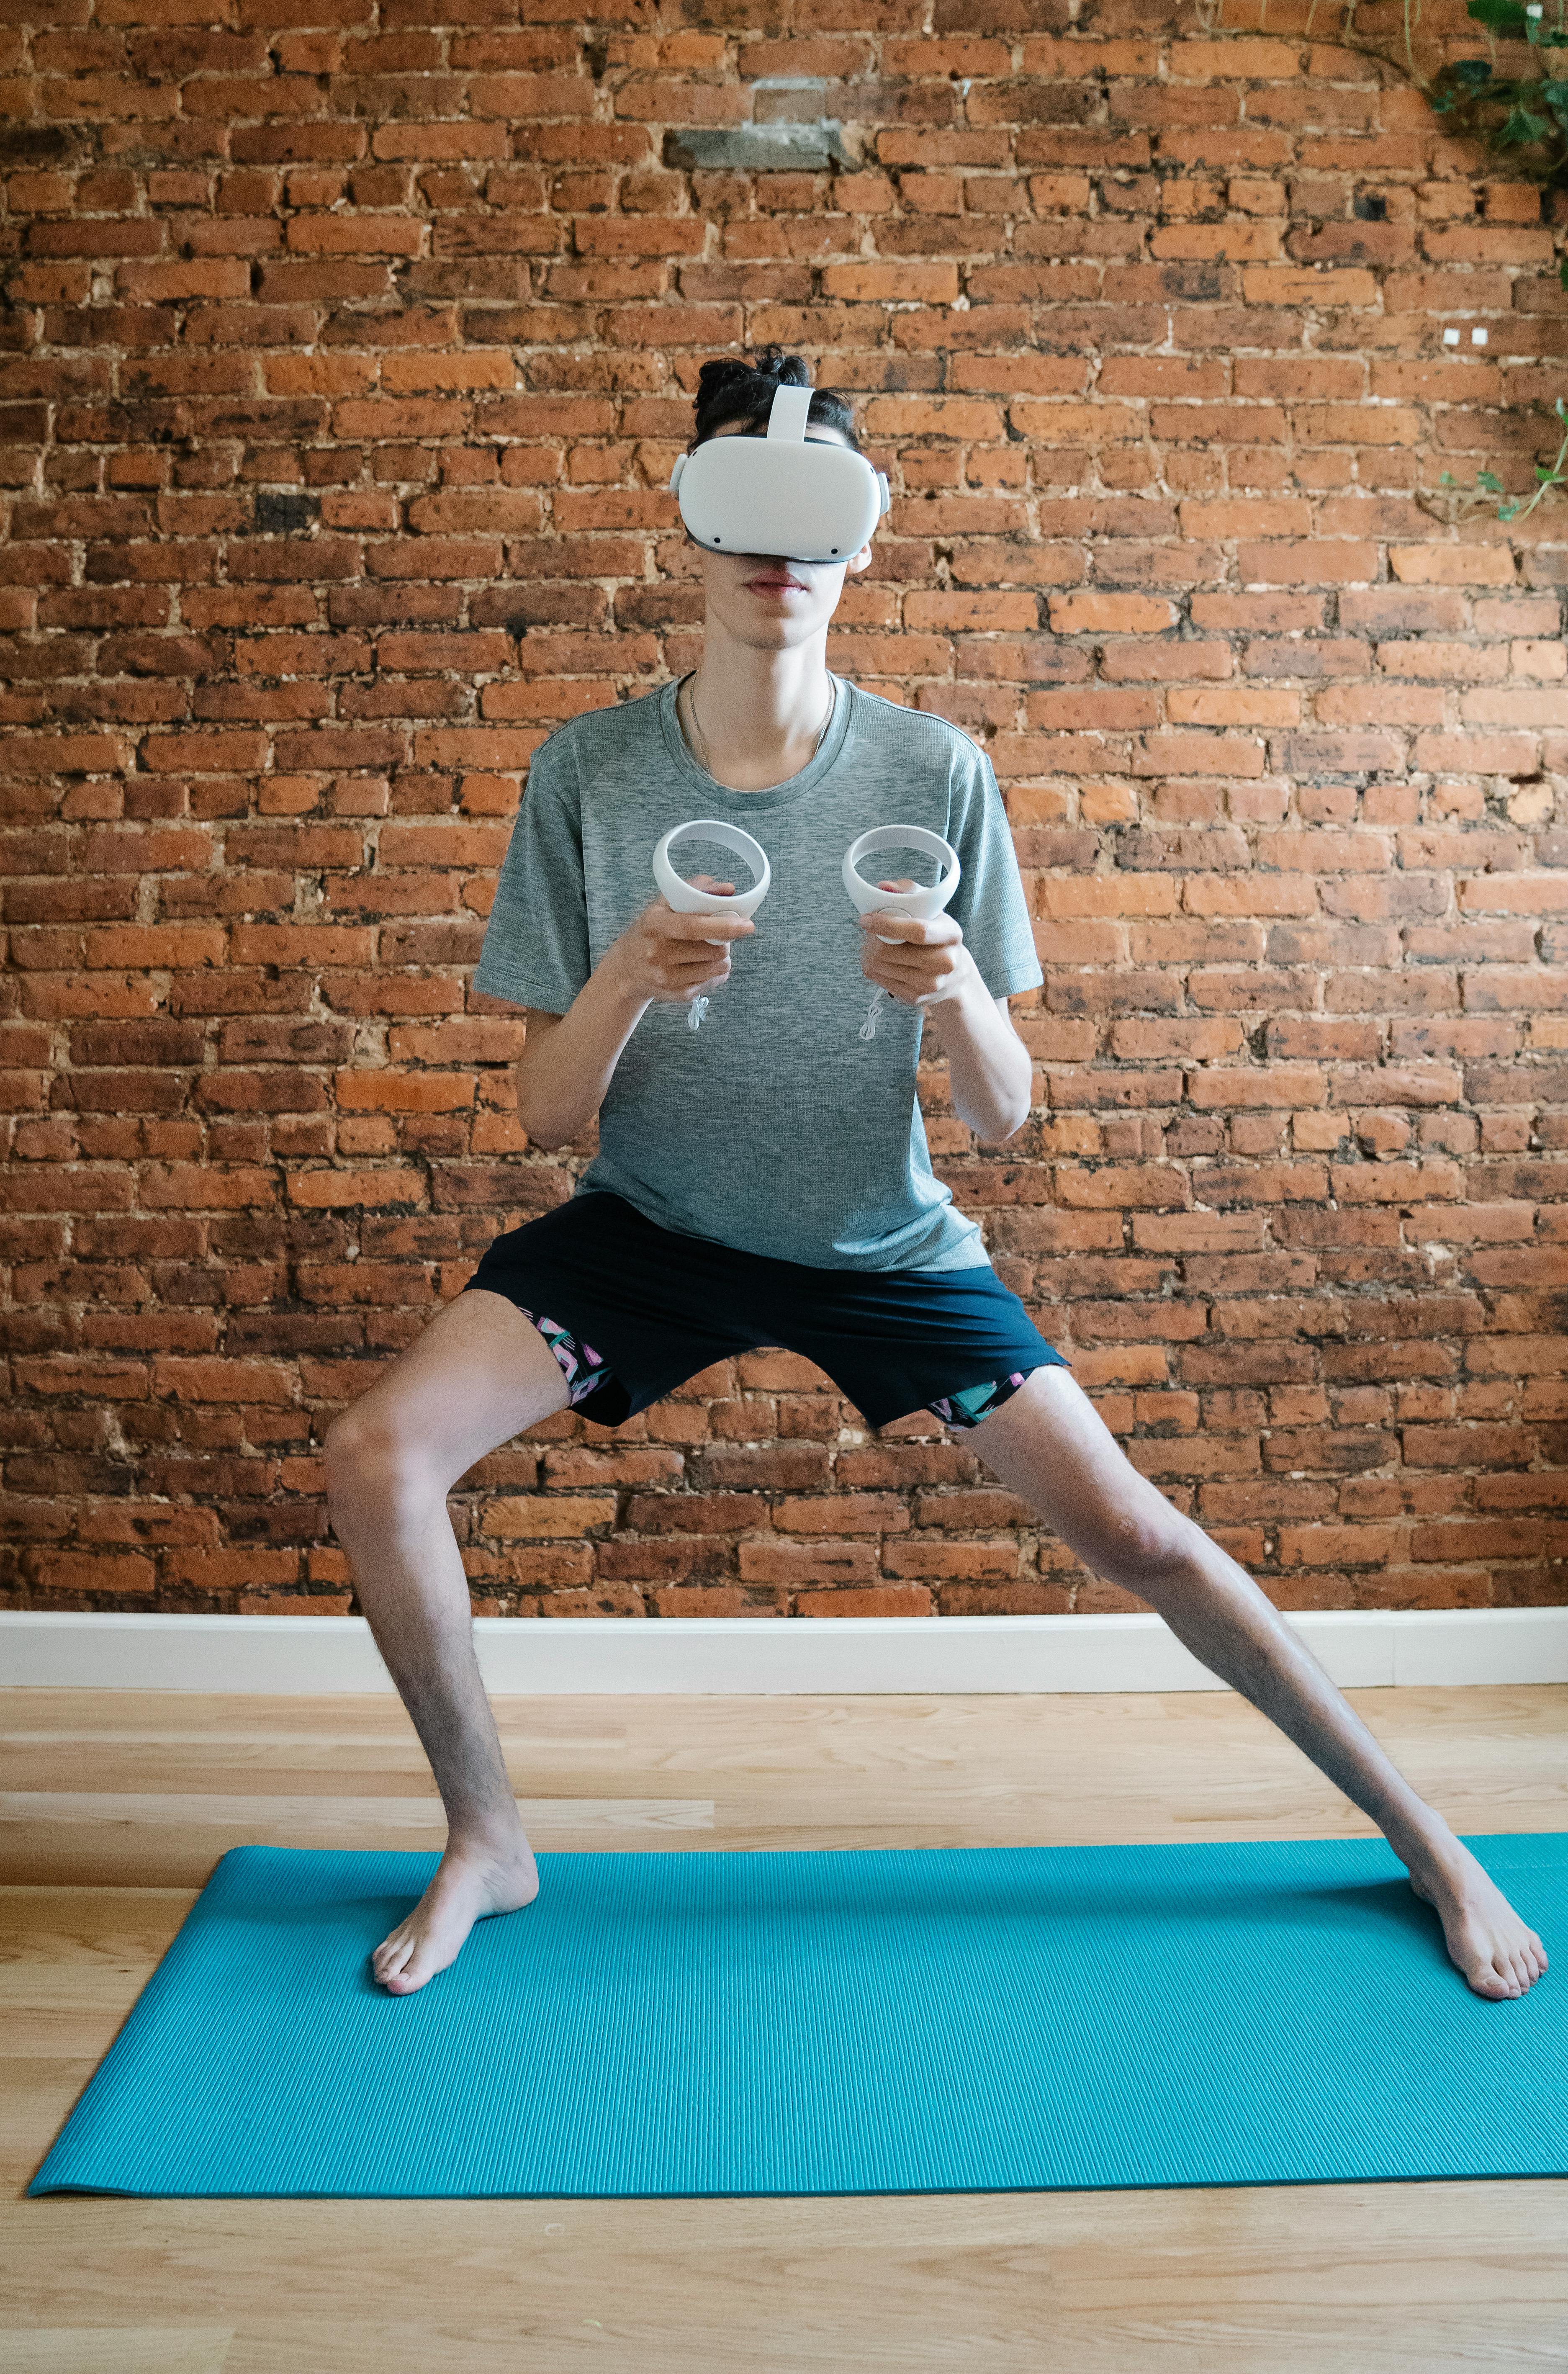 unrecognizable man practicing yoga in vr headset